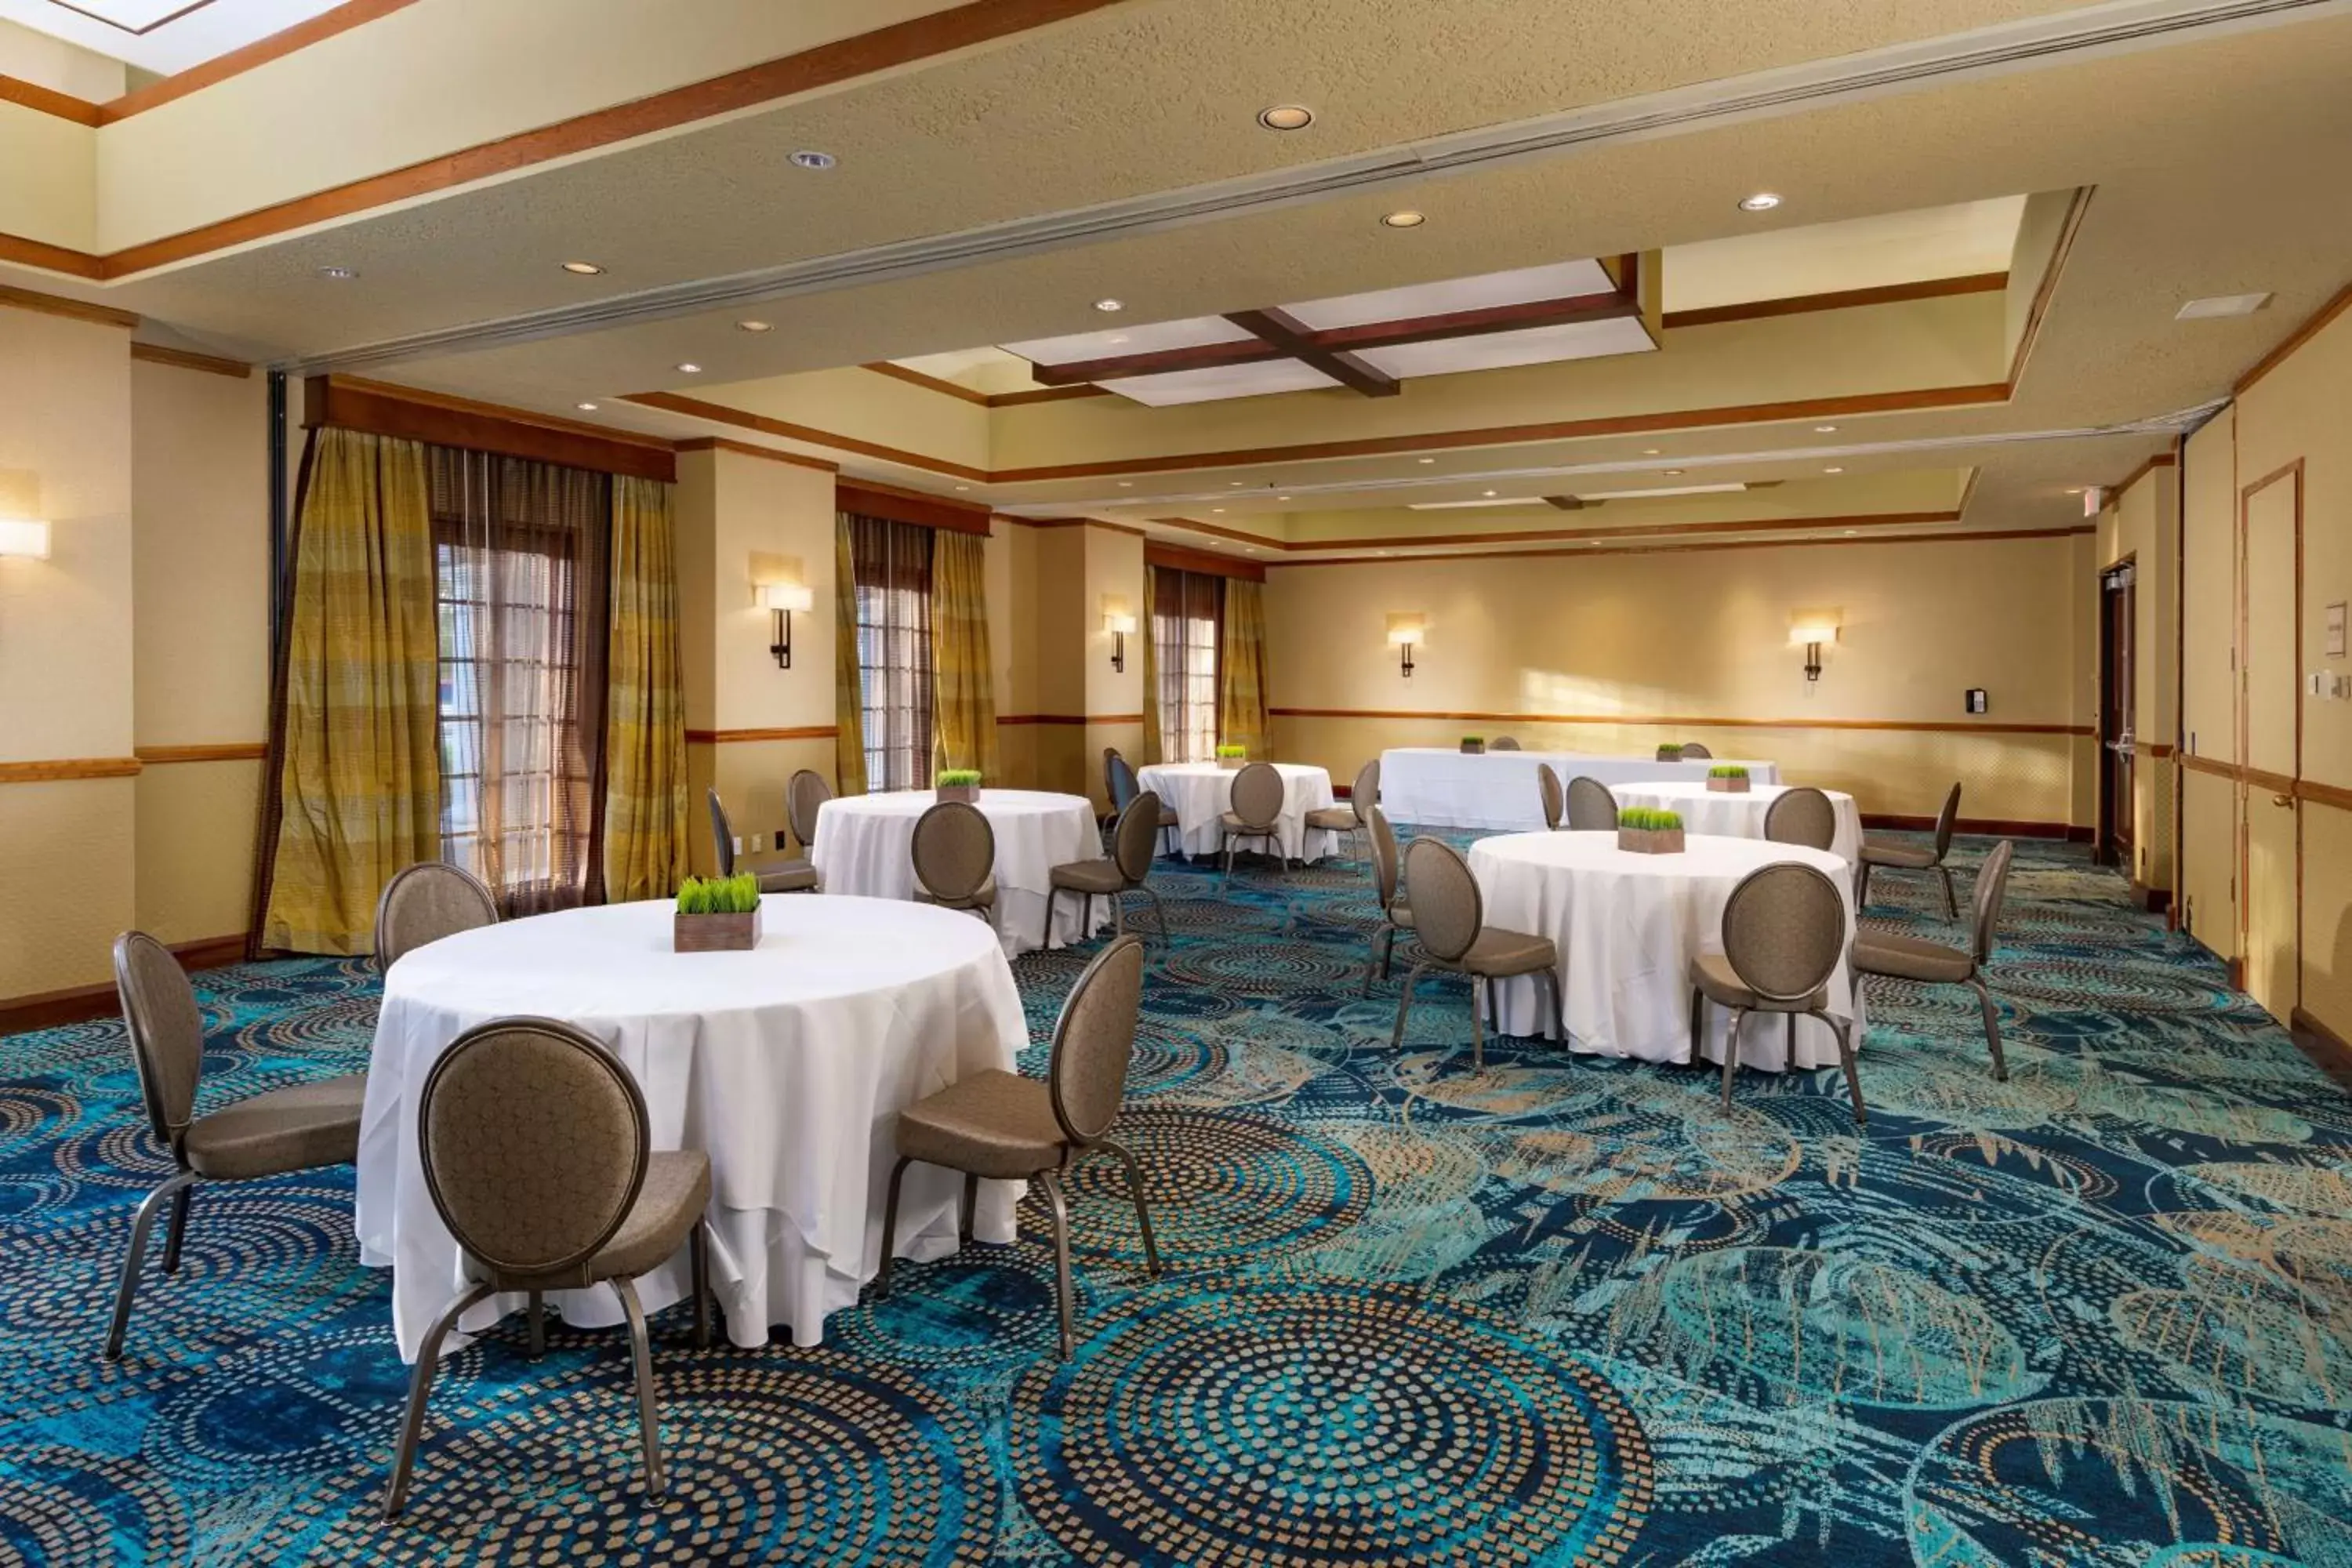 Meeting/conference room, Banquet Facilities in Doubletree by Hilton Phoenix Mesa